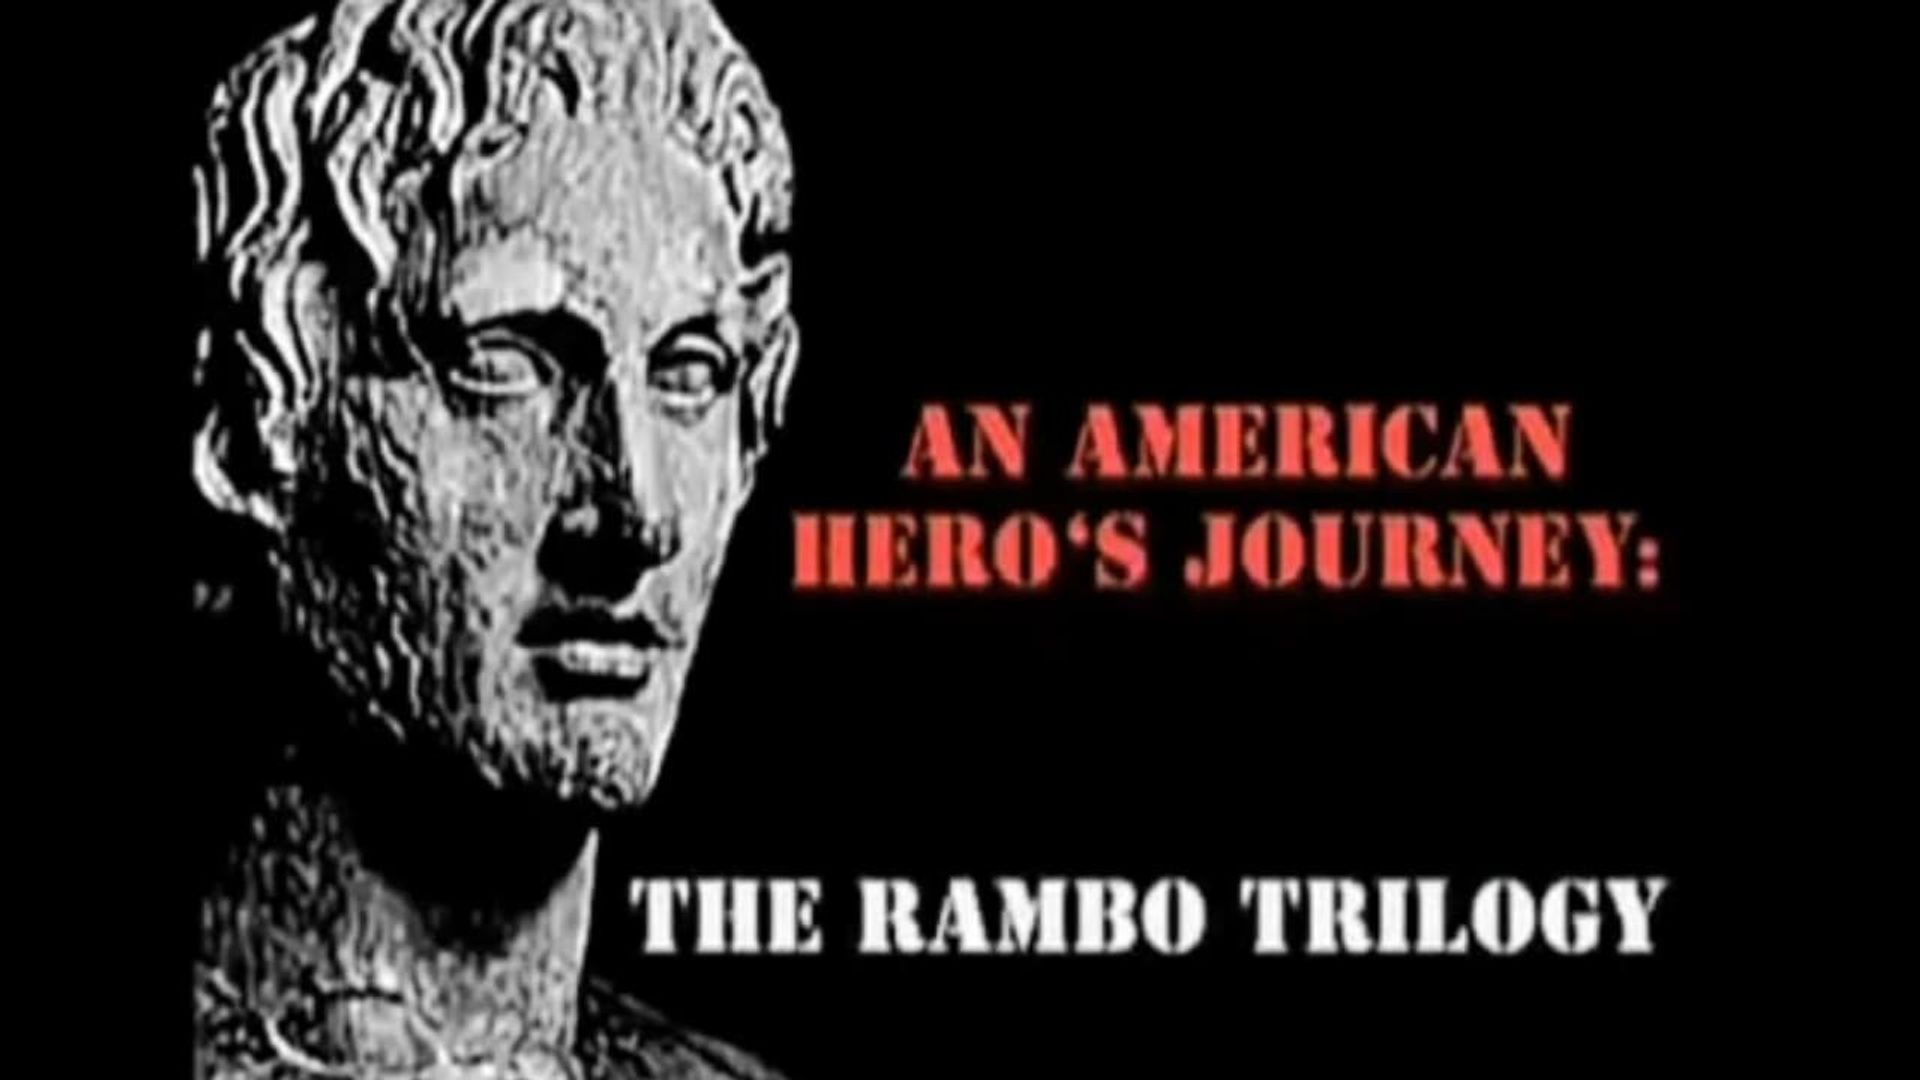 An American Hero's Journey: The Rambo Trilogy background